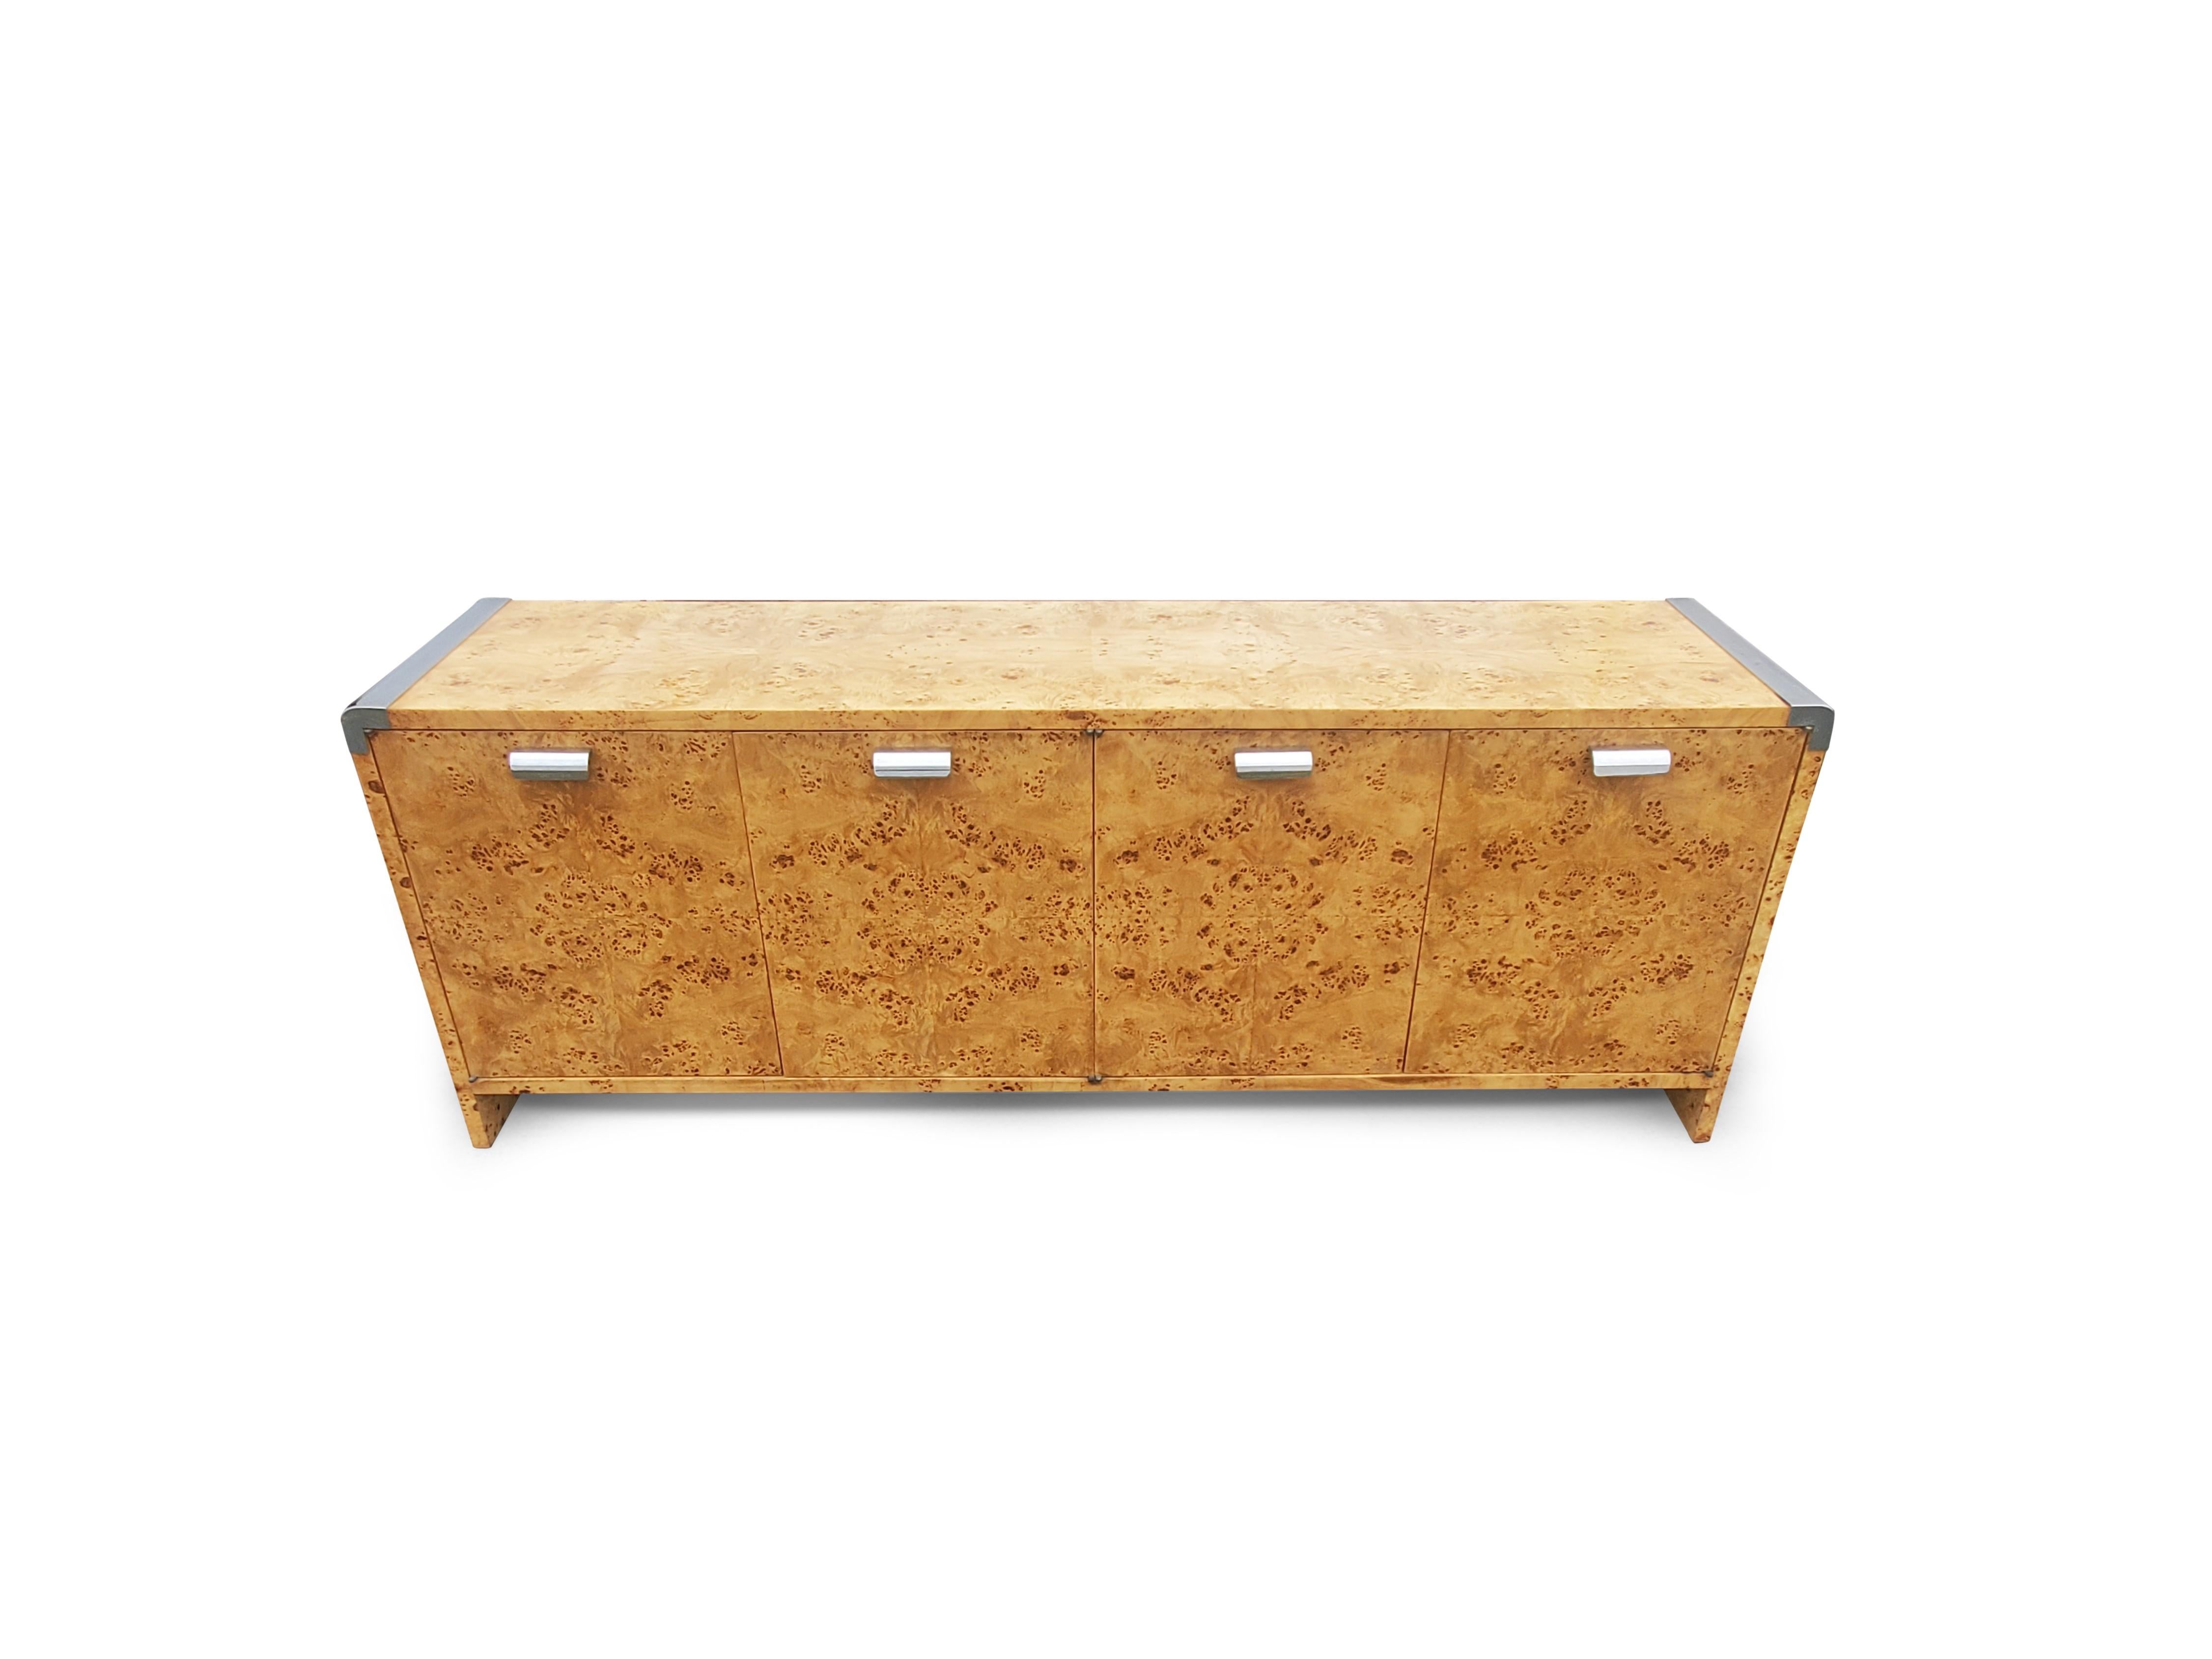 Leon Rosen Pace Collection burl wood credenza.